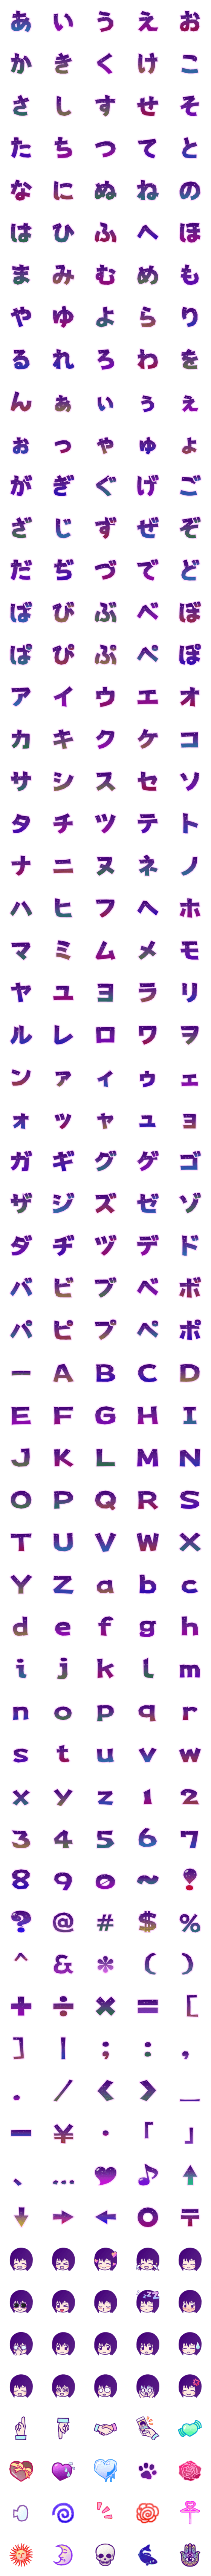 [LINE絵文字]にしき的絵文字 02 - 夜想の画像一覧